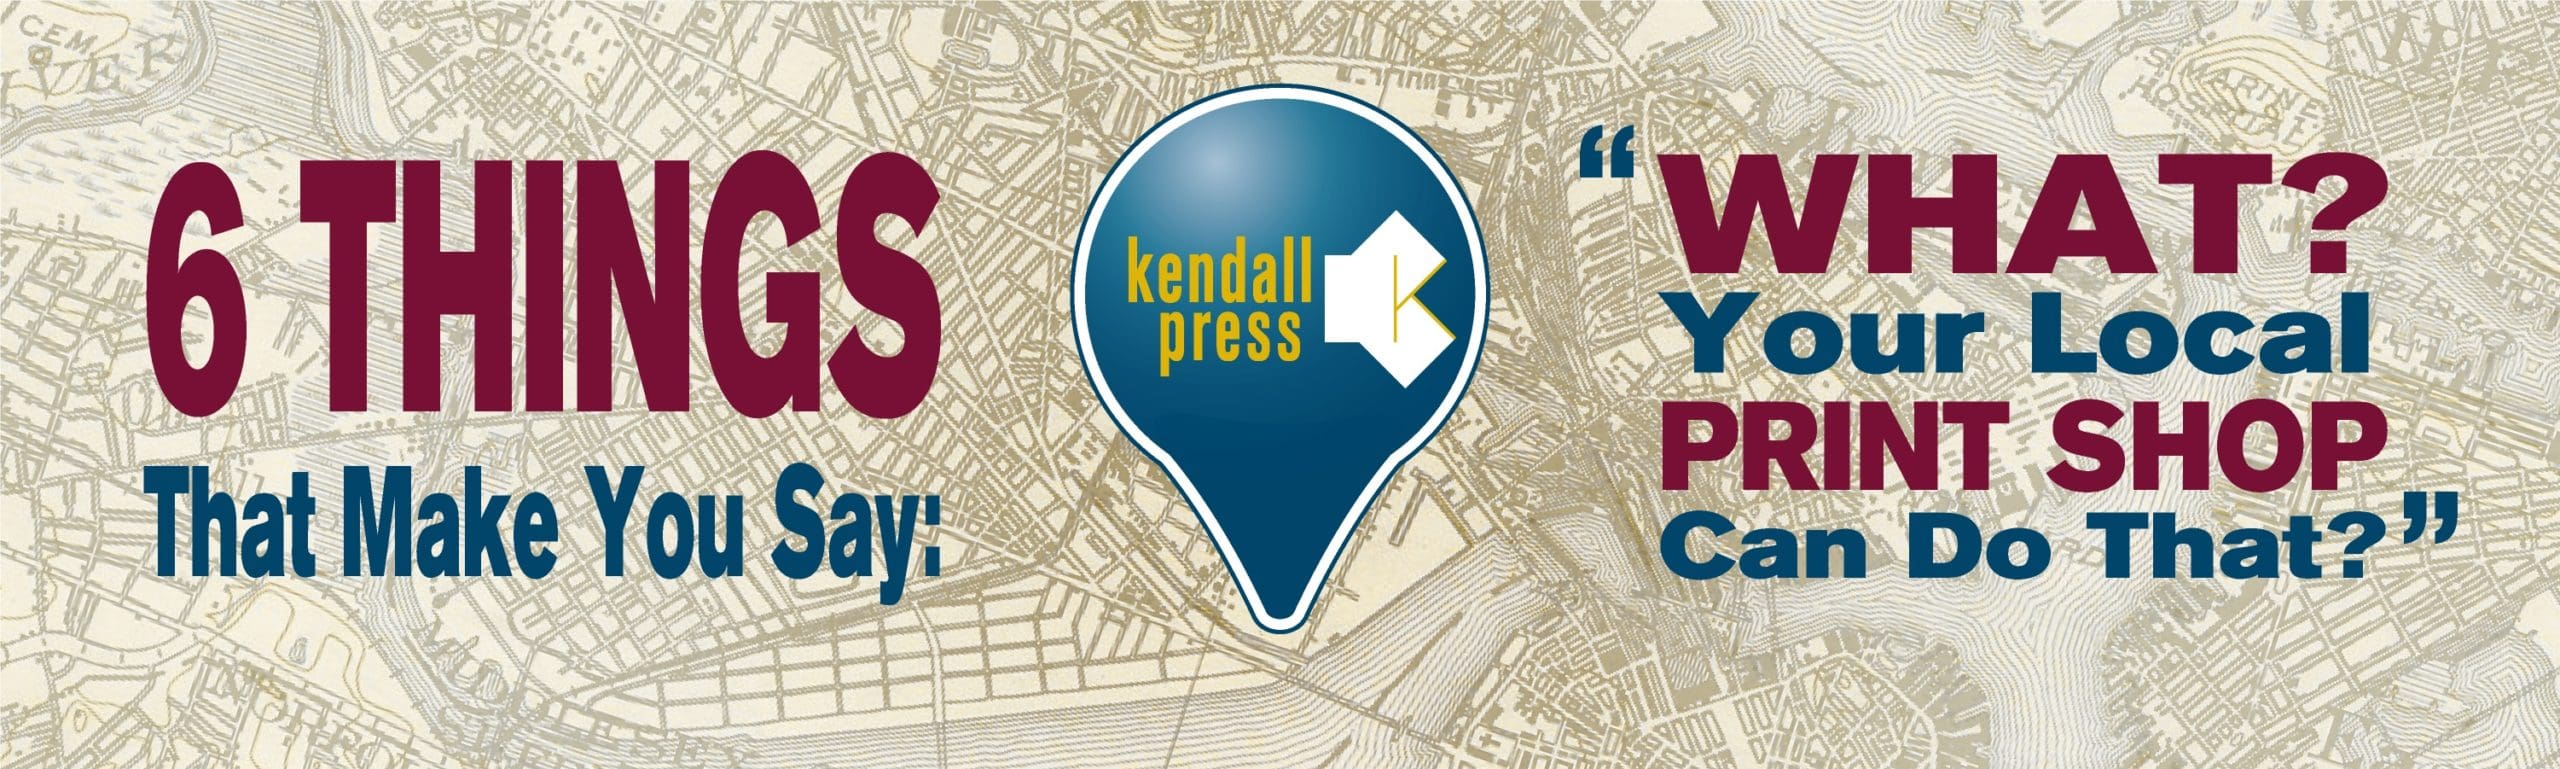 Kendall Press - Your Local Print Shop